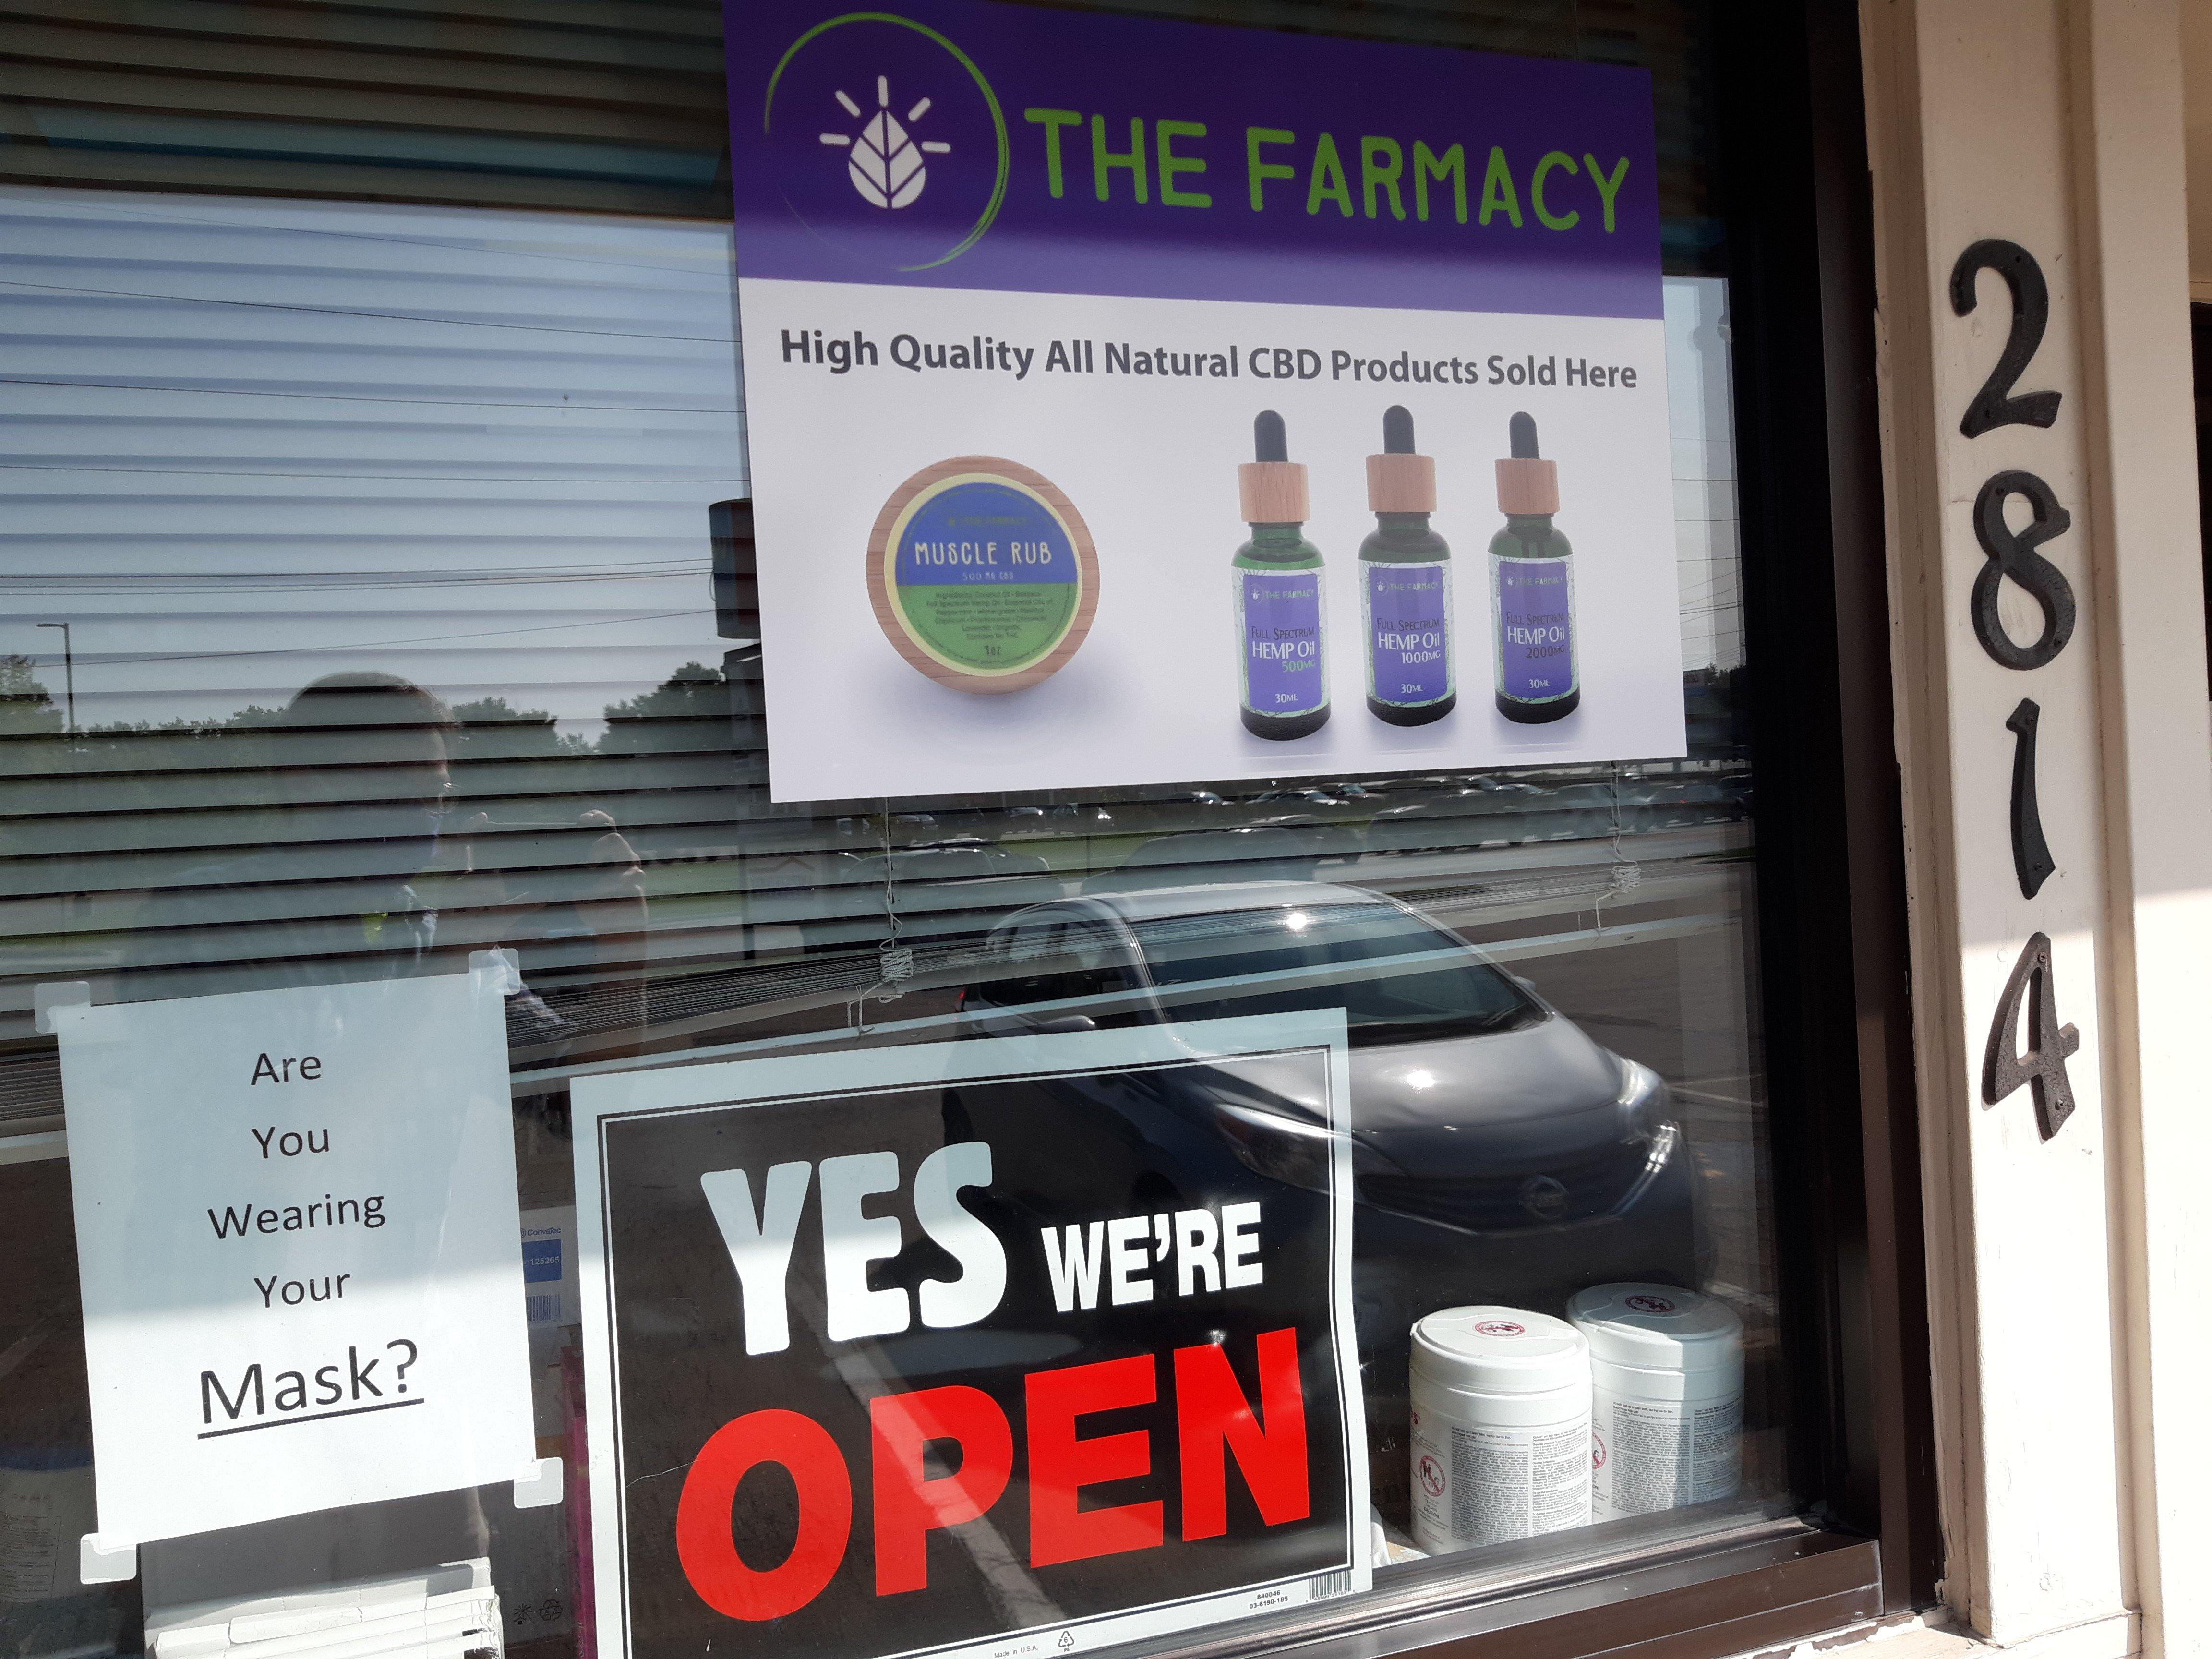 Is Your Profession Ready for CBD? - by Kelly Rippel - The Farmacy